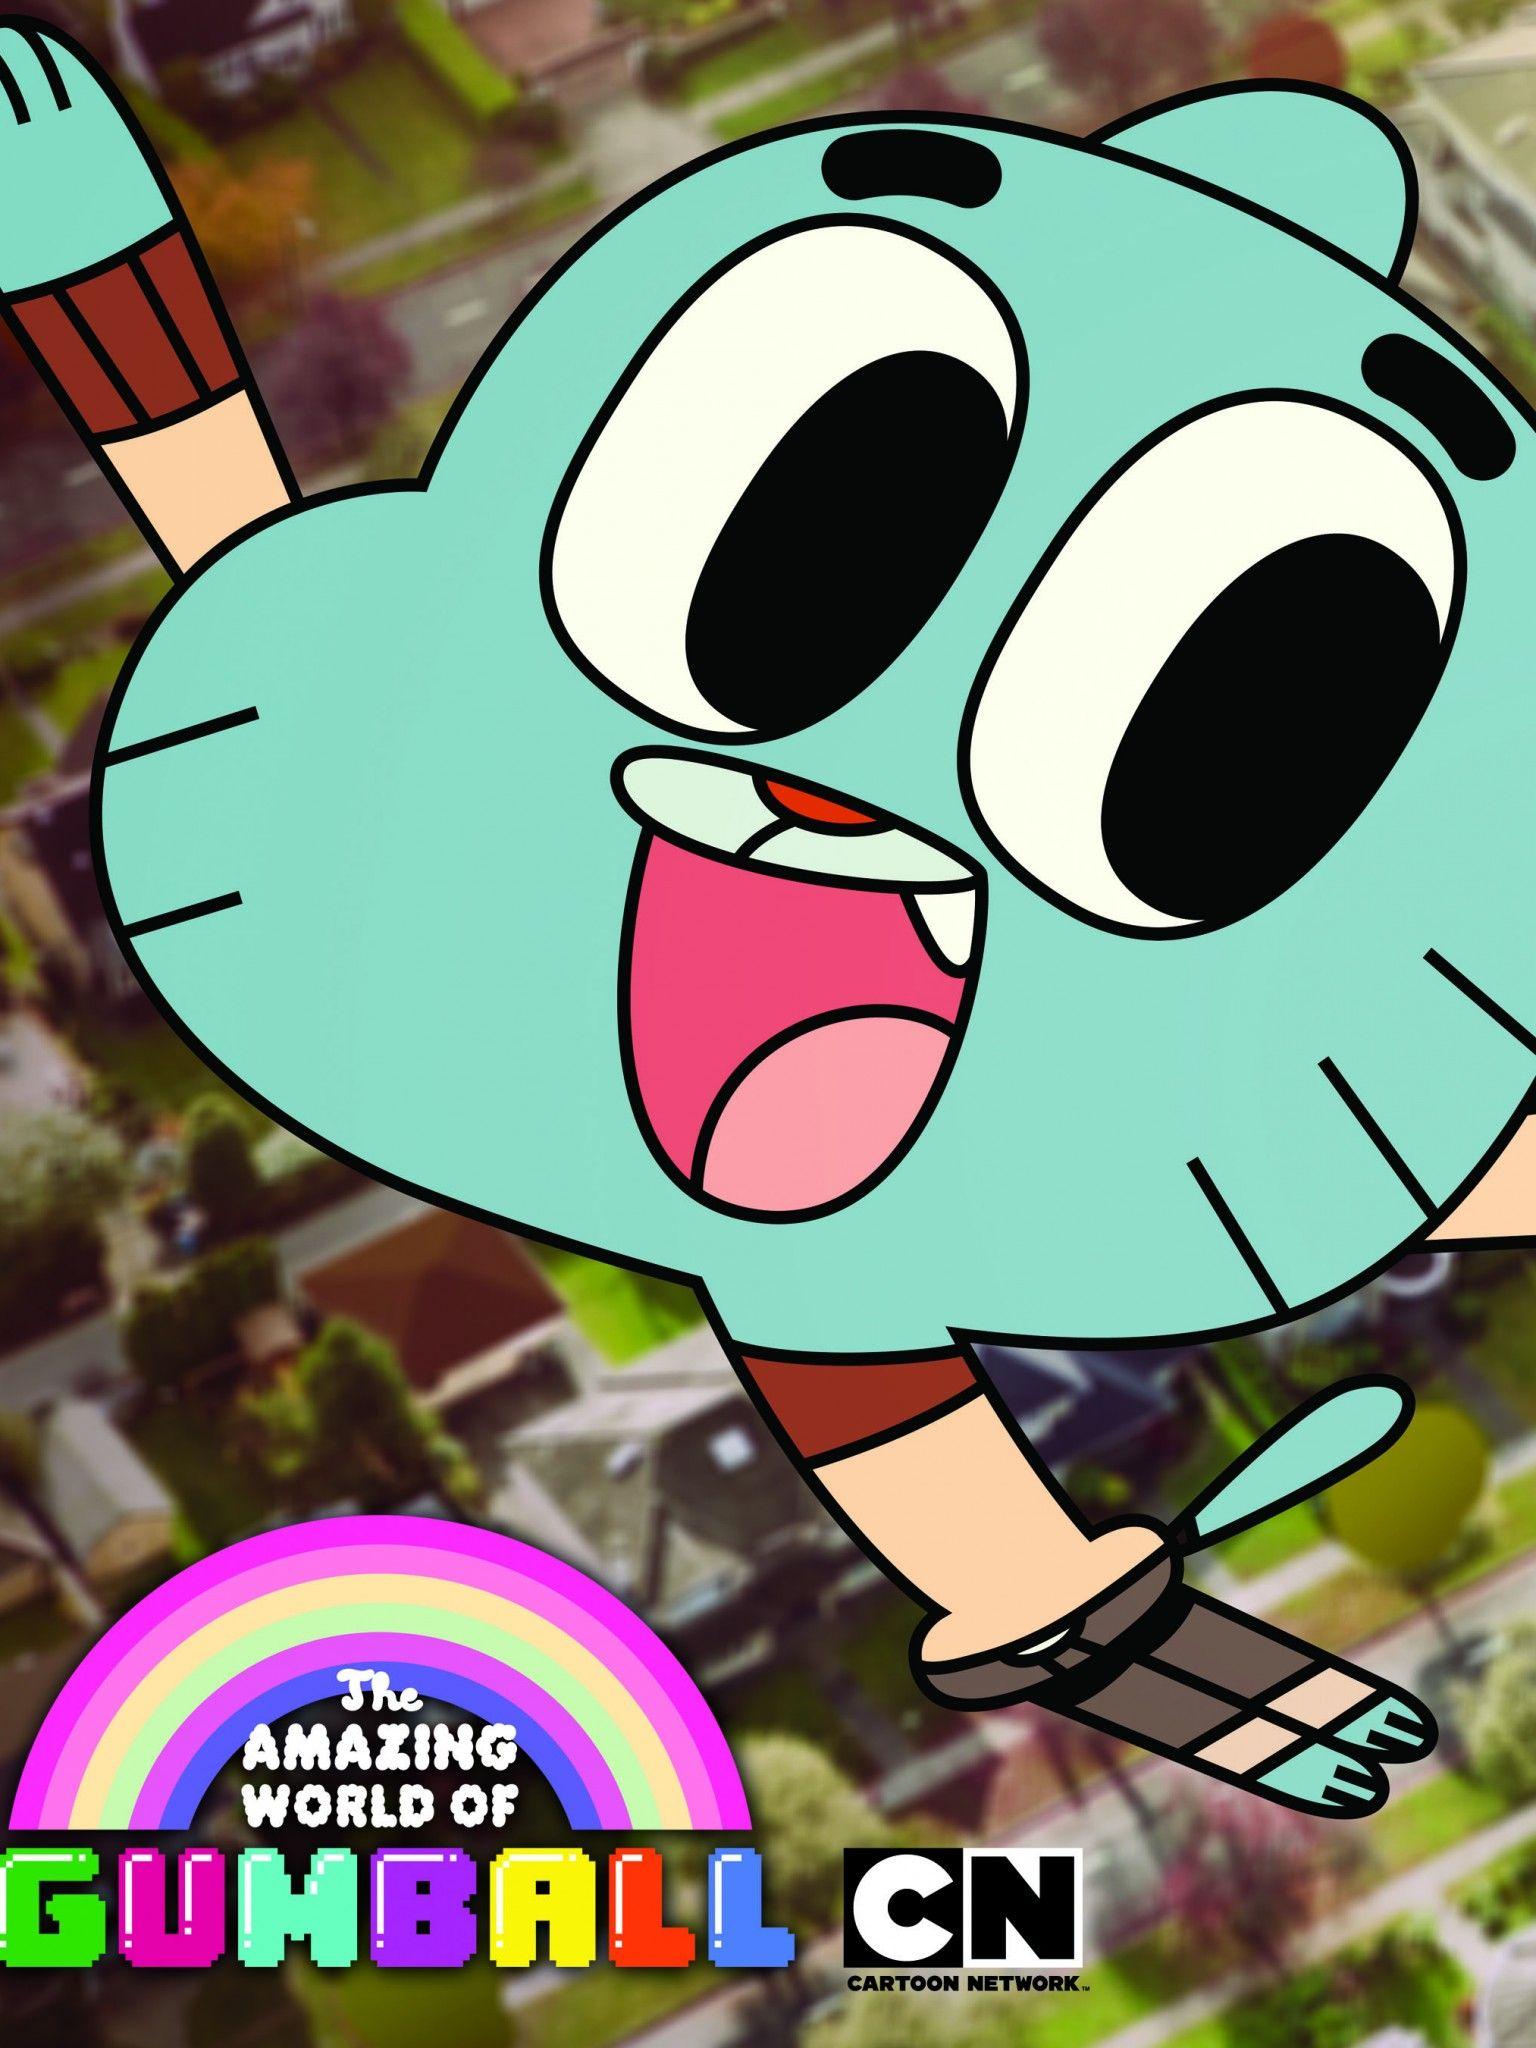 Download Wallpaper 1536x2048 Amazing world of gumball dreams